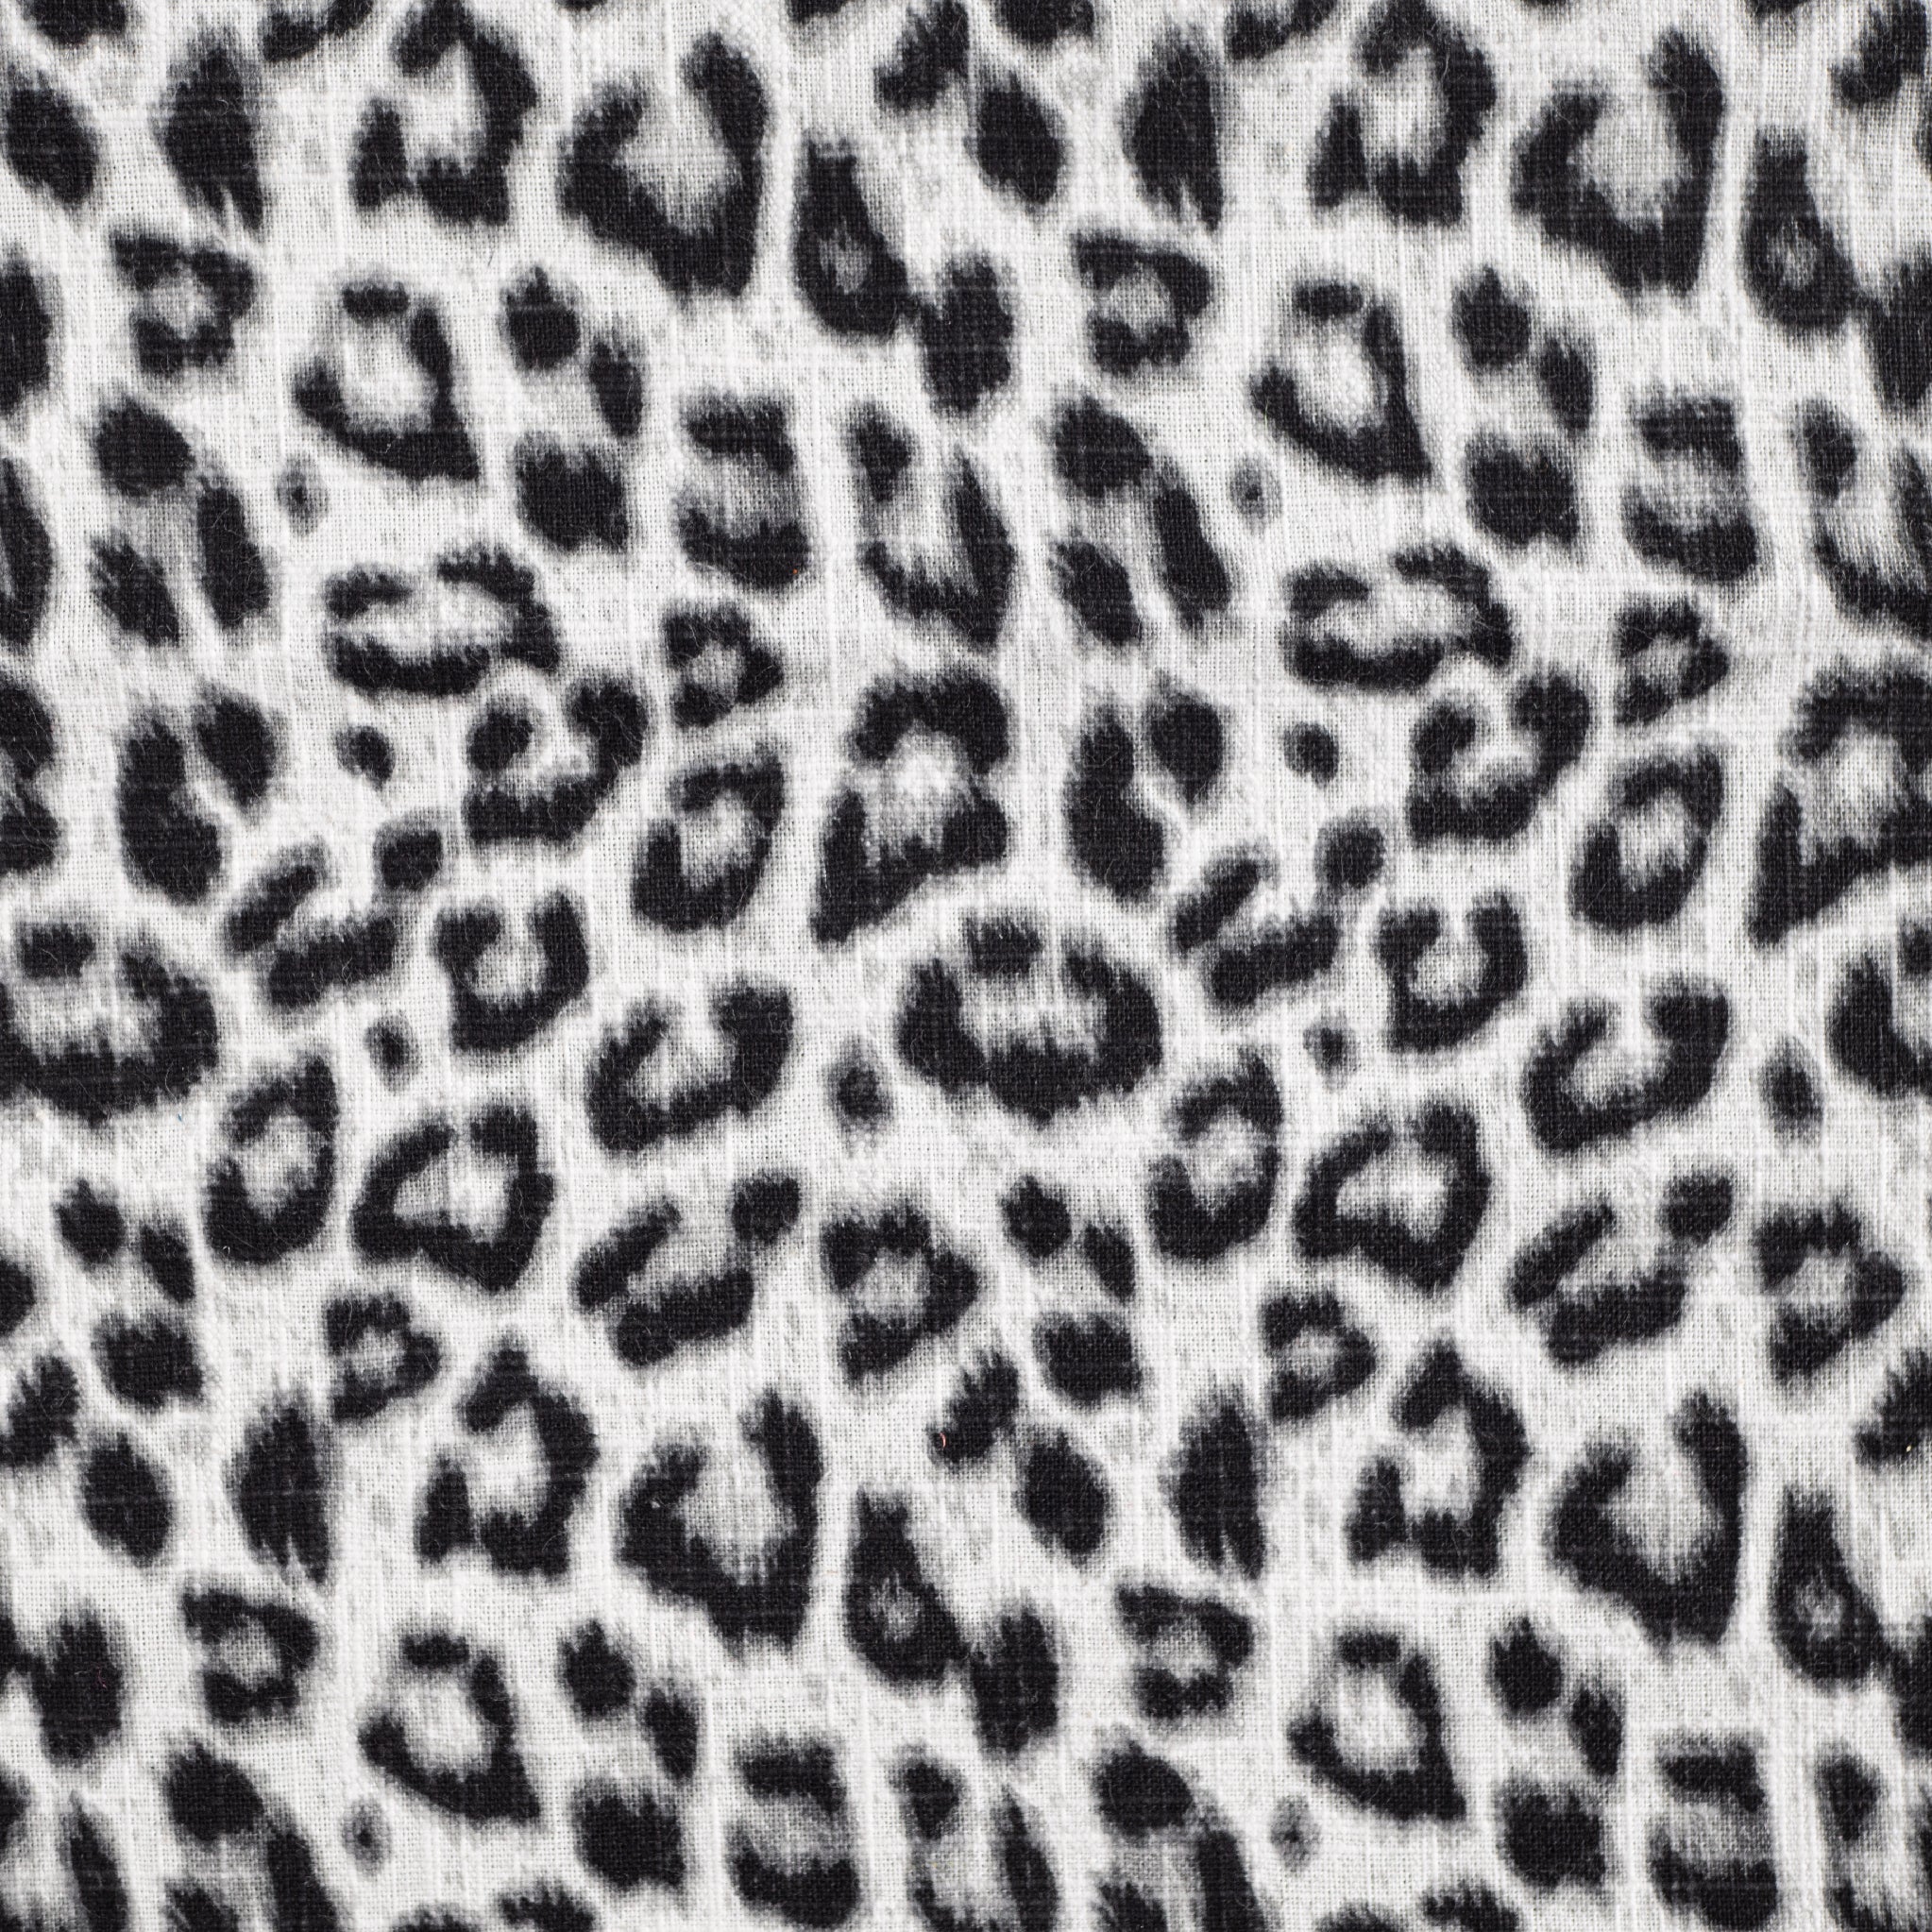  Fustylead Black and White Leopard Print Fall Winter